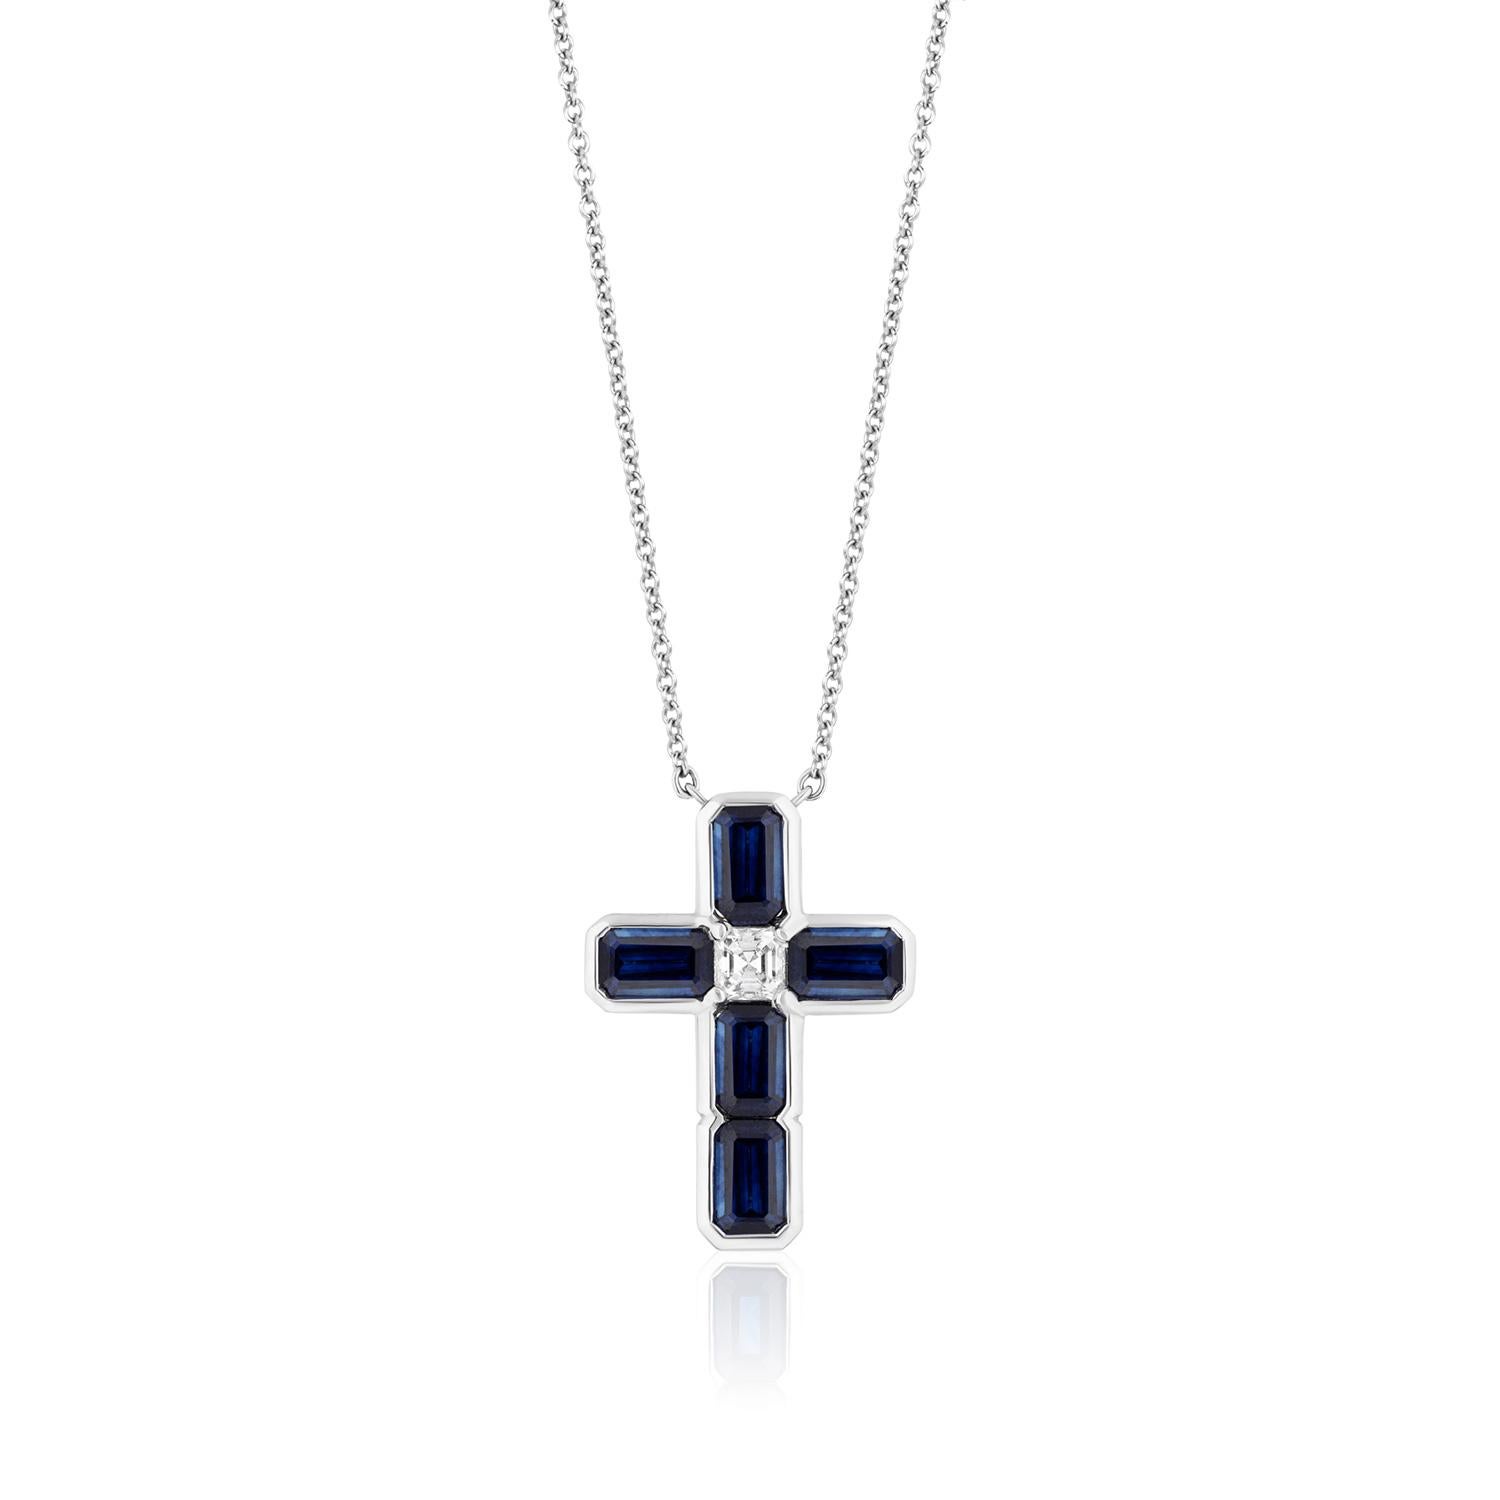 Emerald Cut Sapphires and White Asscher Cut Diamond set in this beautiful and bold Cross.
5 Emerald Cut Sapphires weighing 3.24 Carats. 1 Diamond Weighing 0.20 Carats.
Set in Platinum
Chain measures 16 inches. Can be lengthened. 